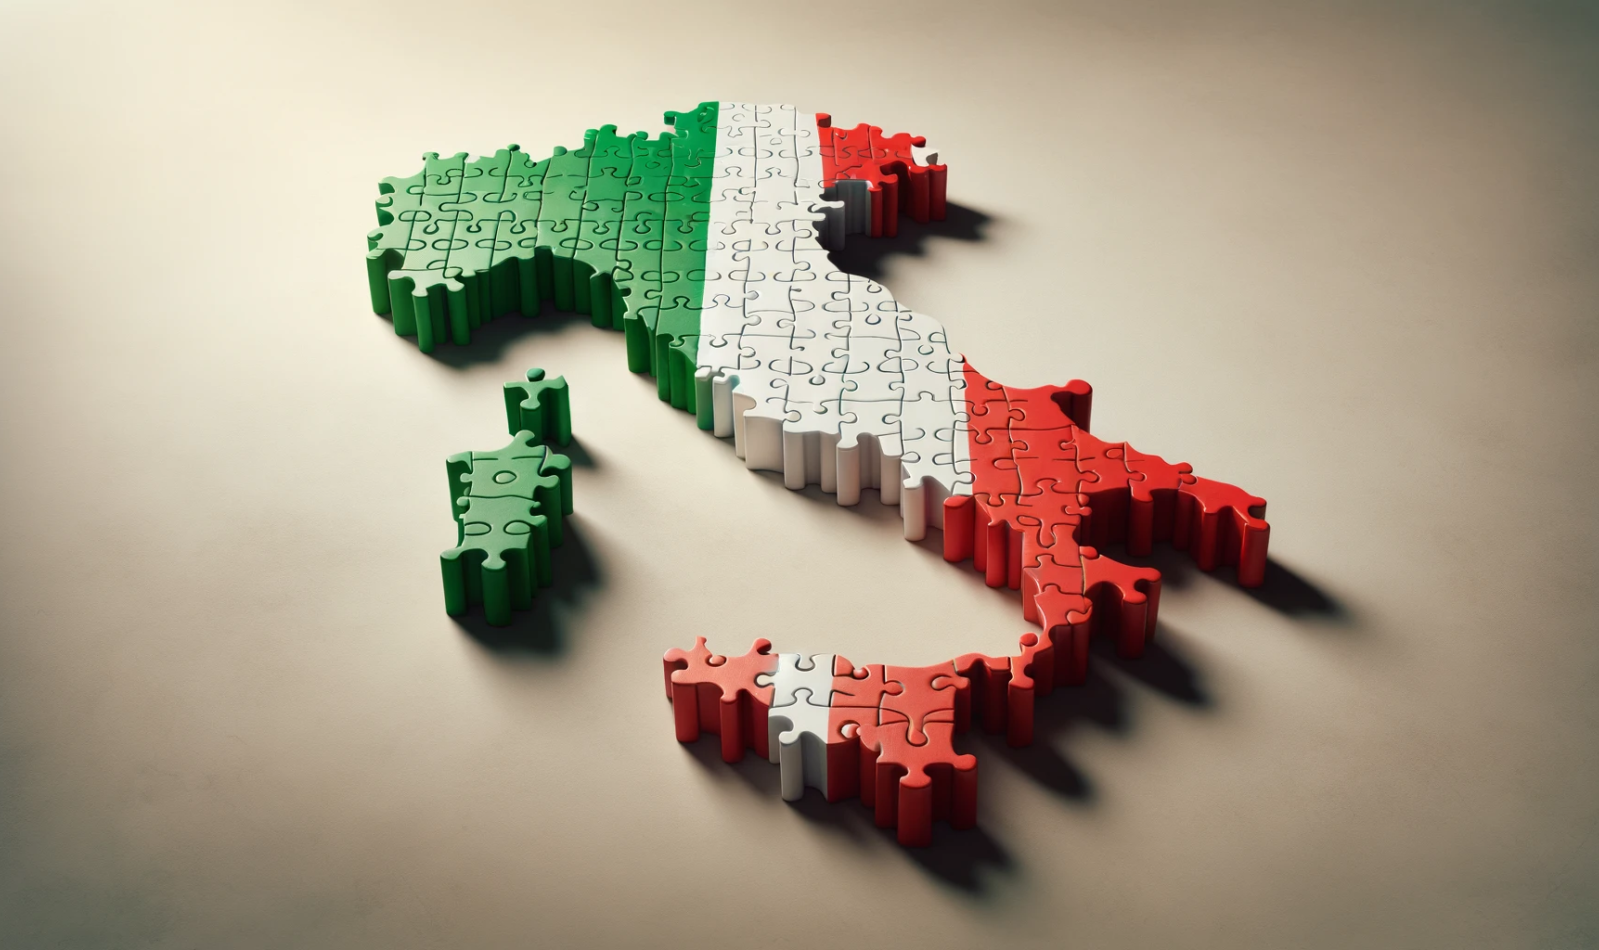 differentiated autonomy in Italy